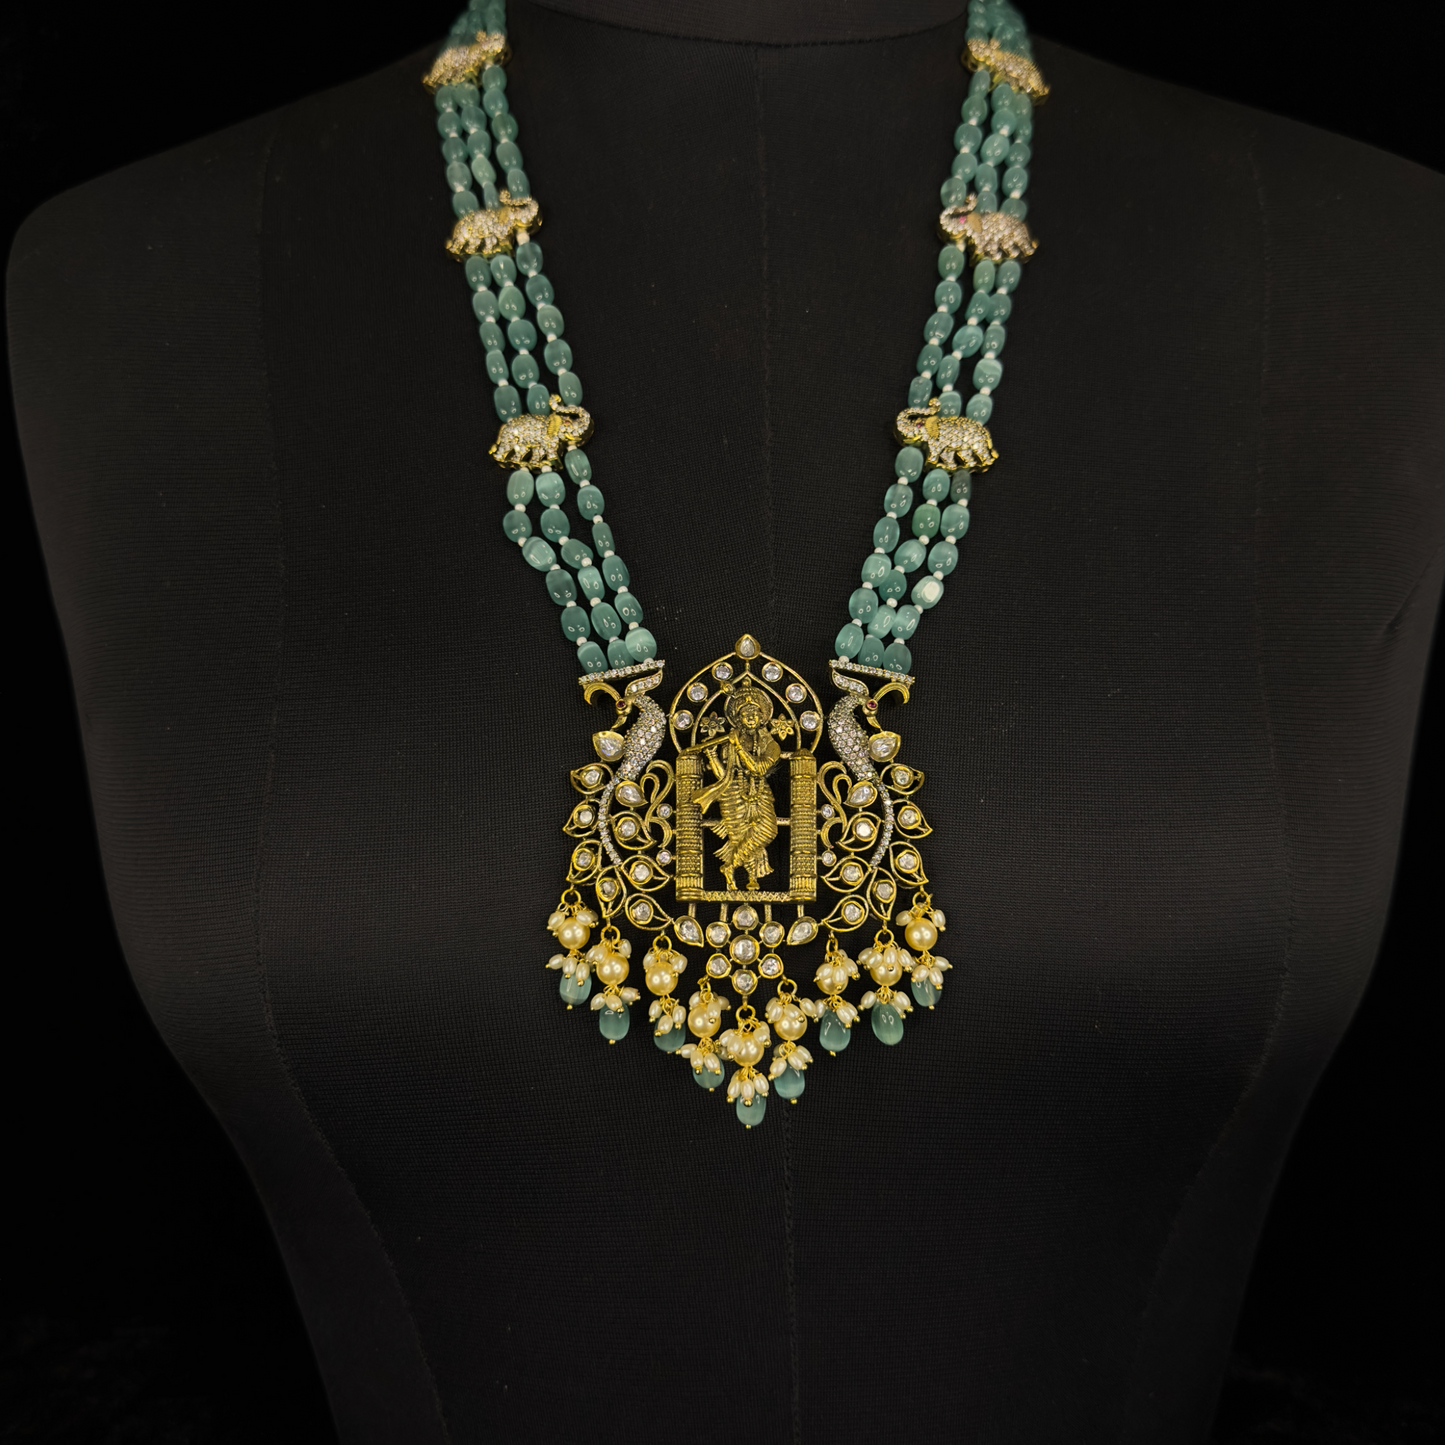 Lord Krishna Antique Pendant Set with Pearl drops. This Victorian Jewellery is available in a Mint colour variant. 